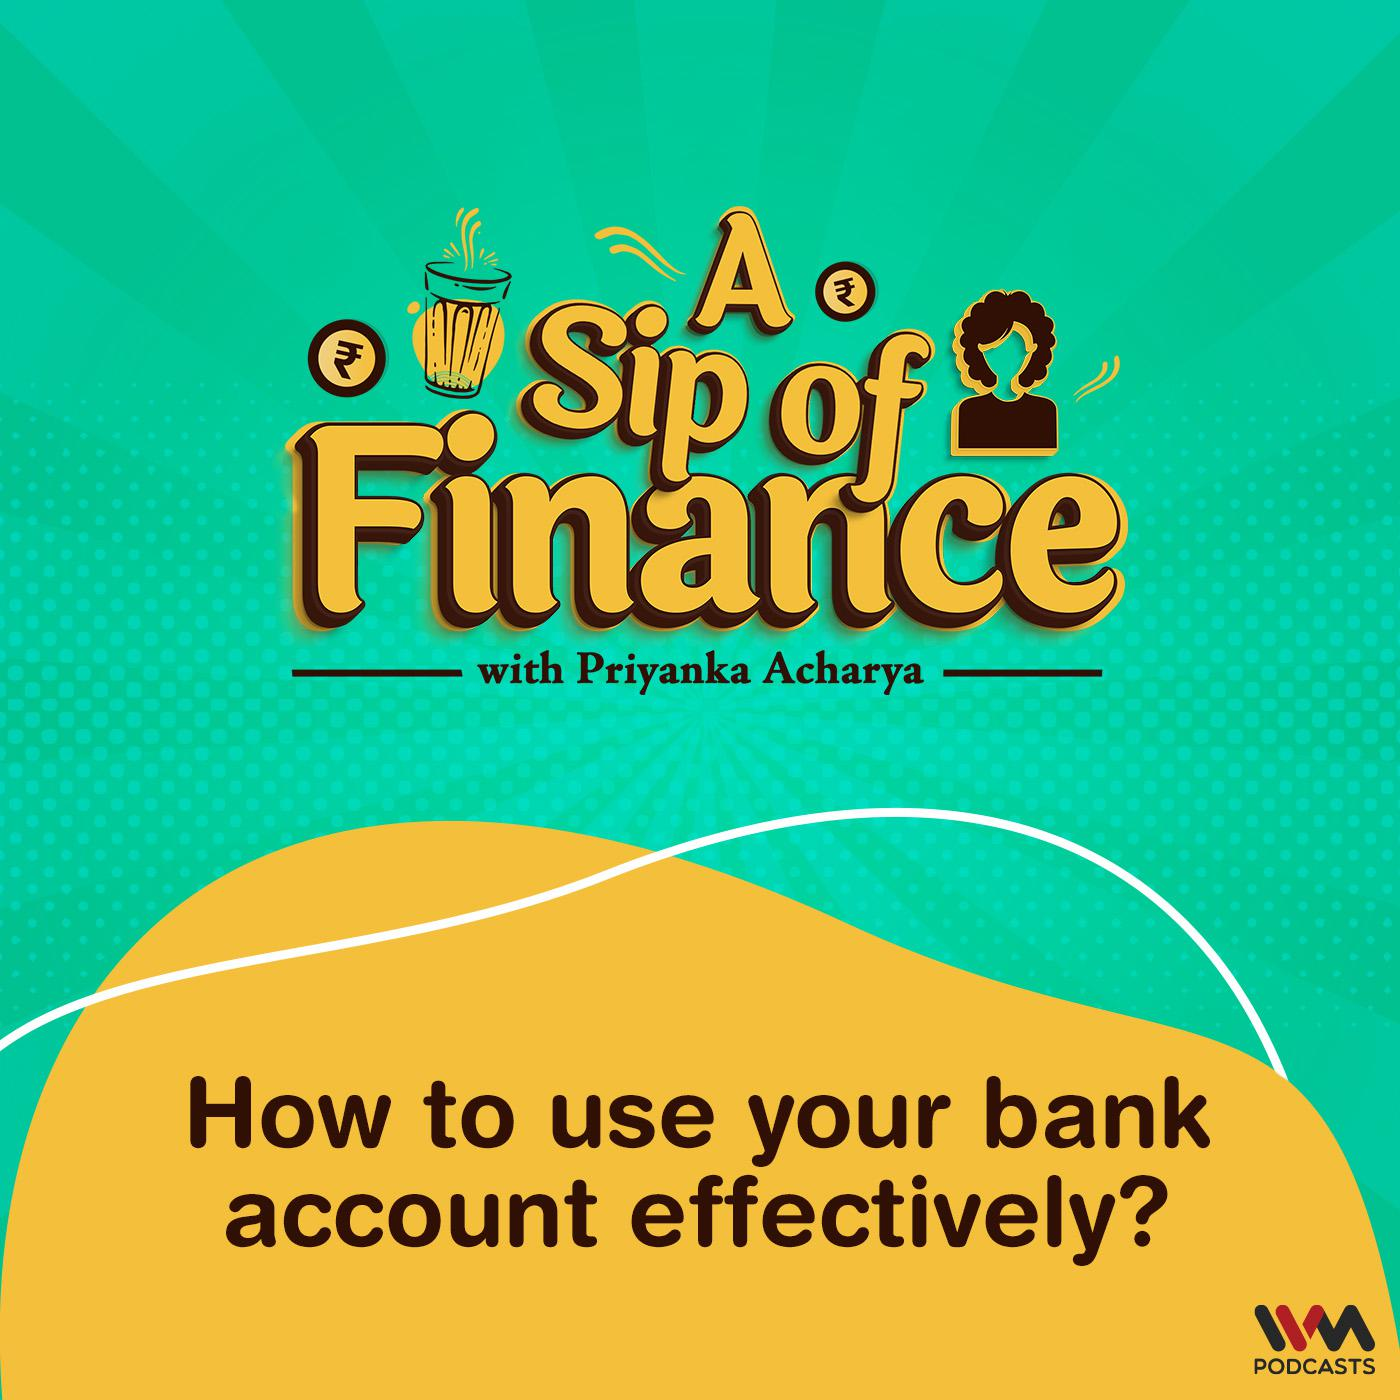 How to use your bank account effectively?